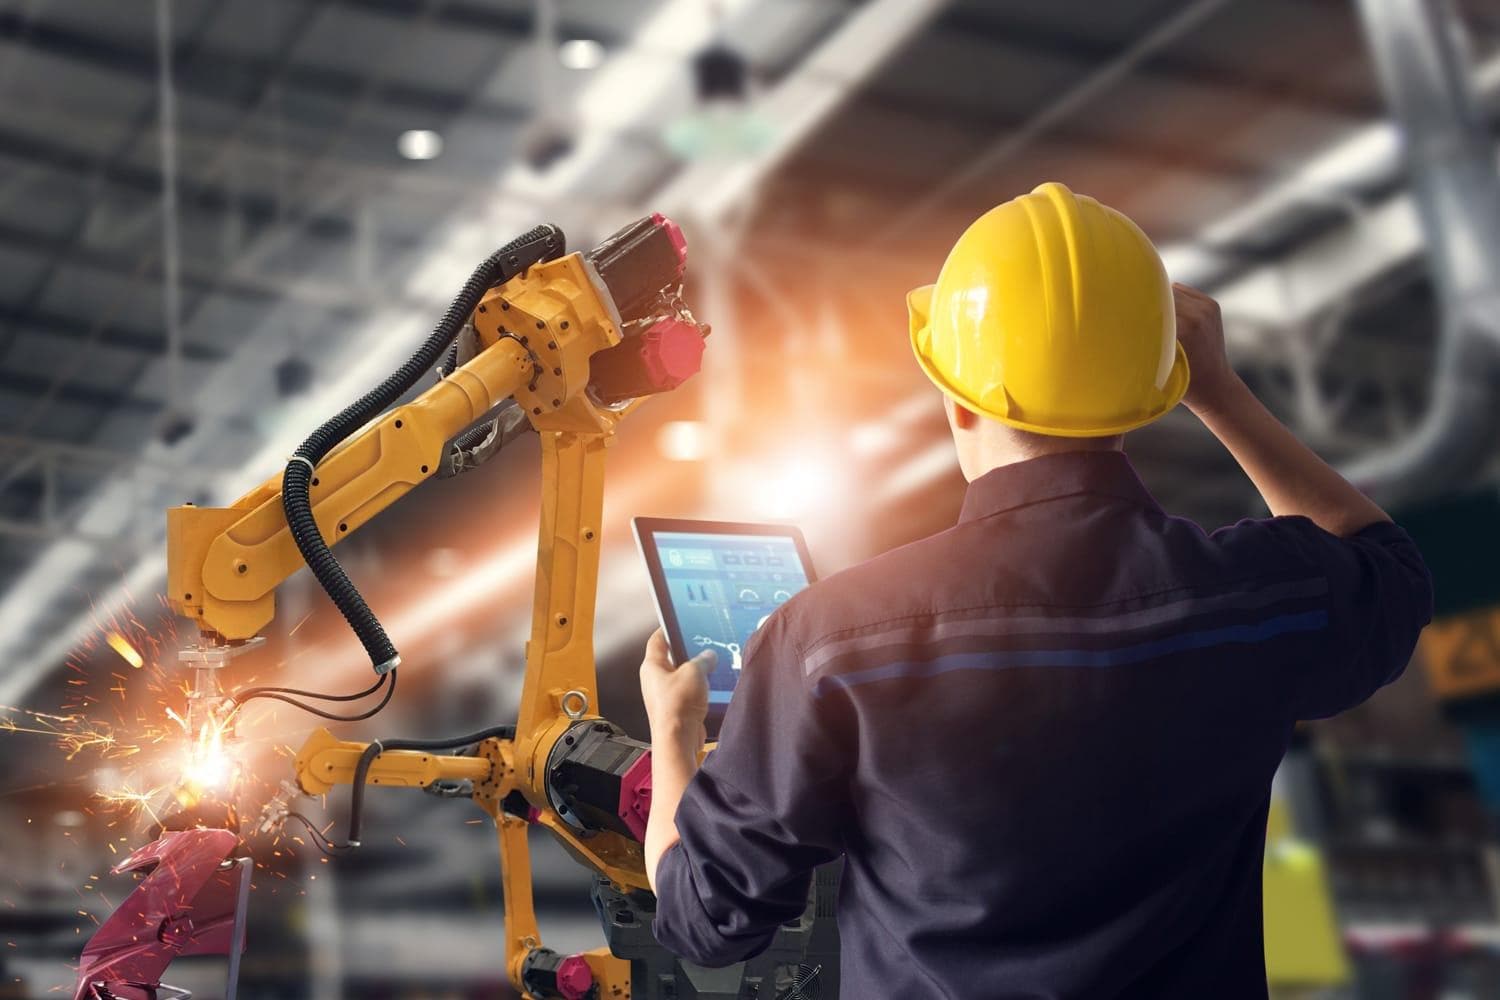 Engineer in yellow hardhat holds tablet computer while watching robotic arm weld metal